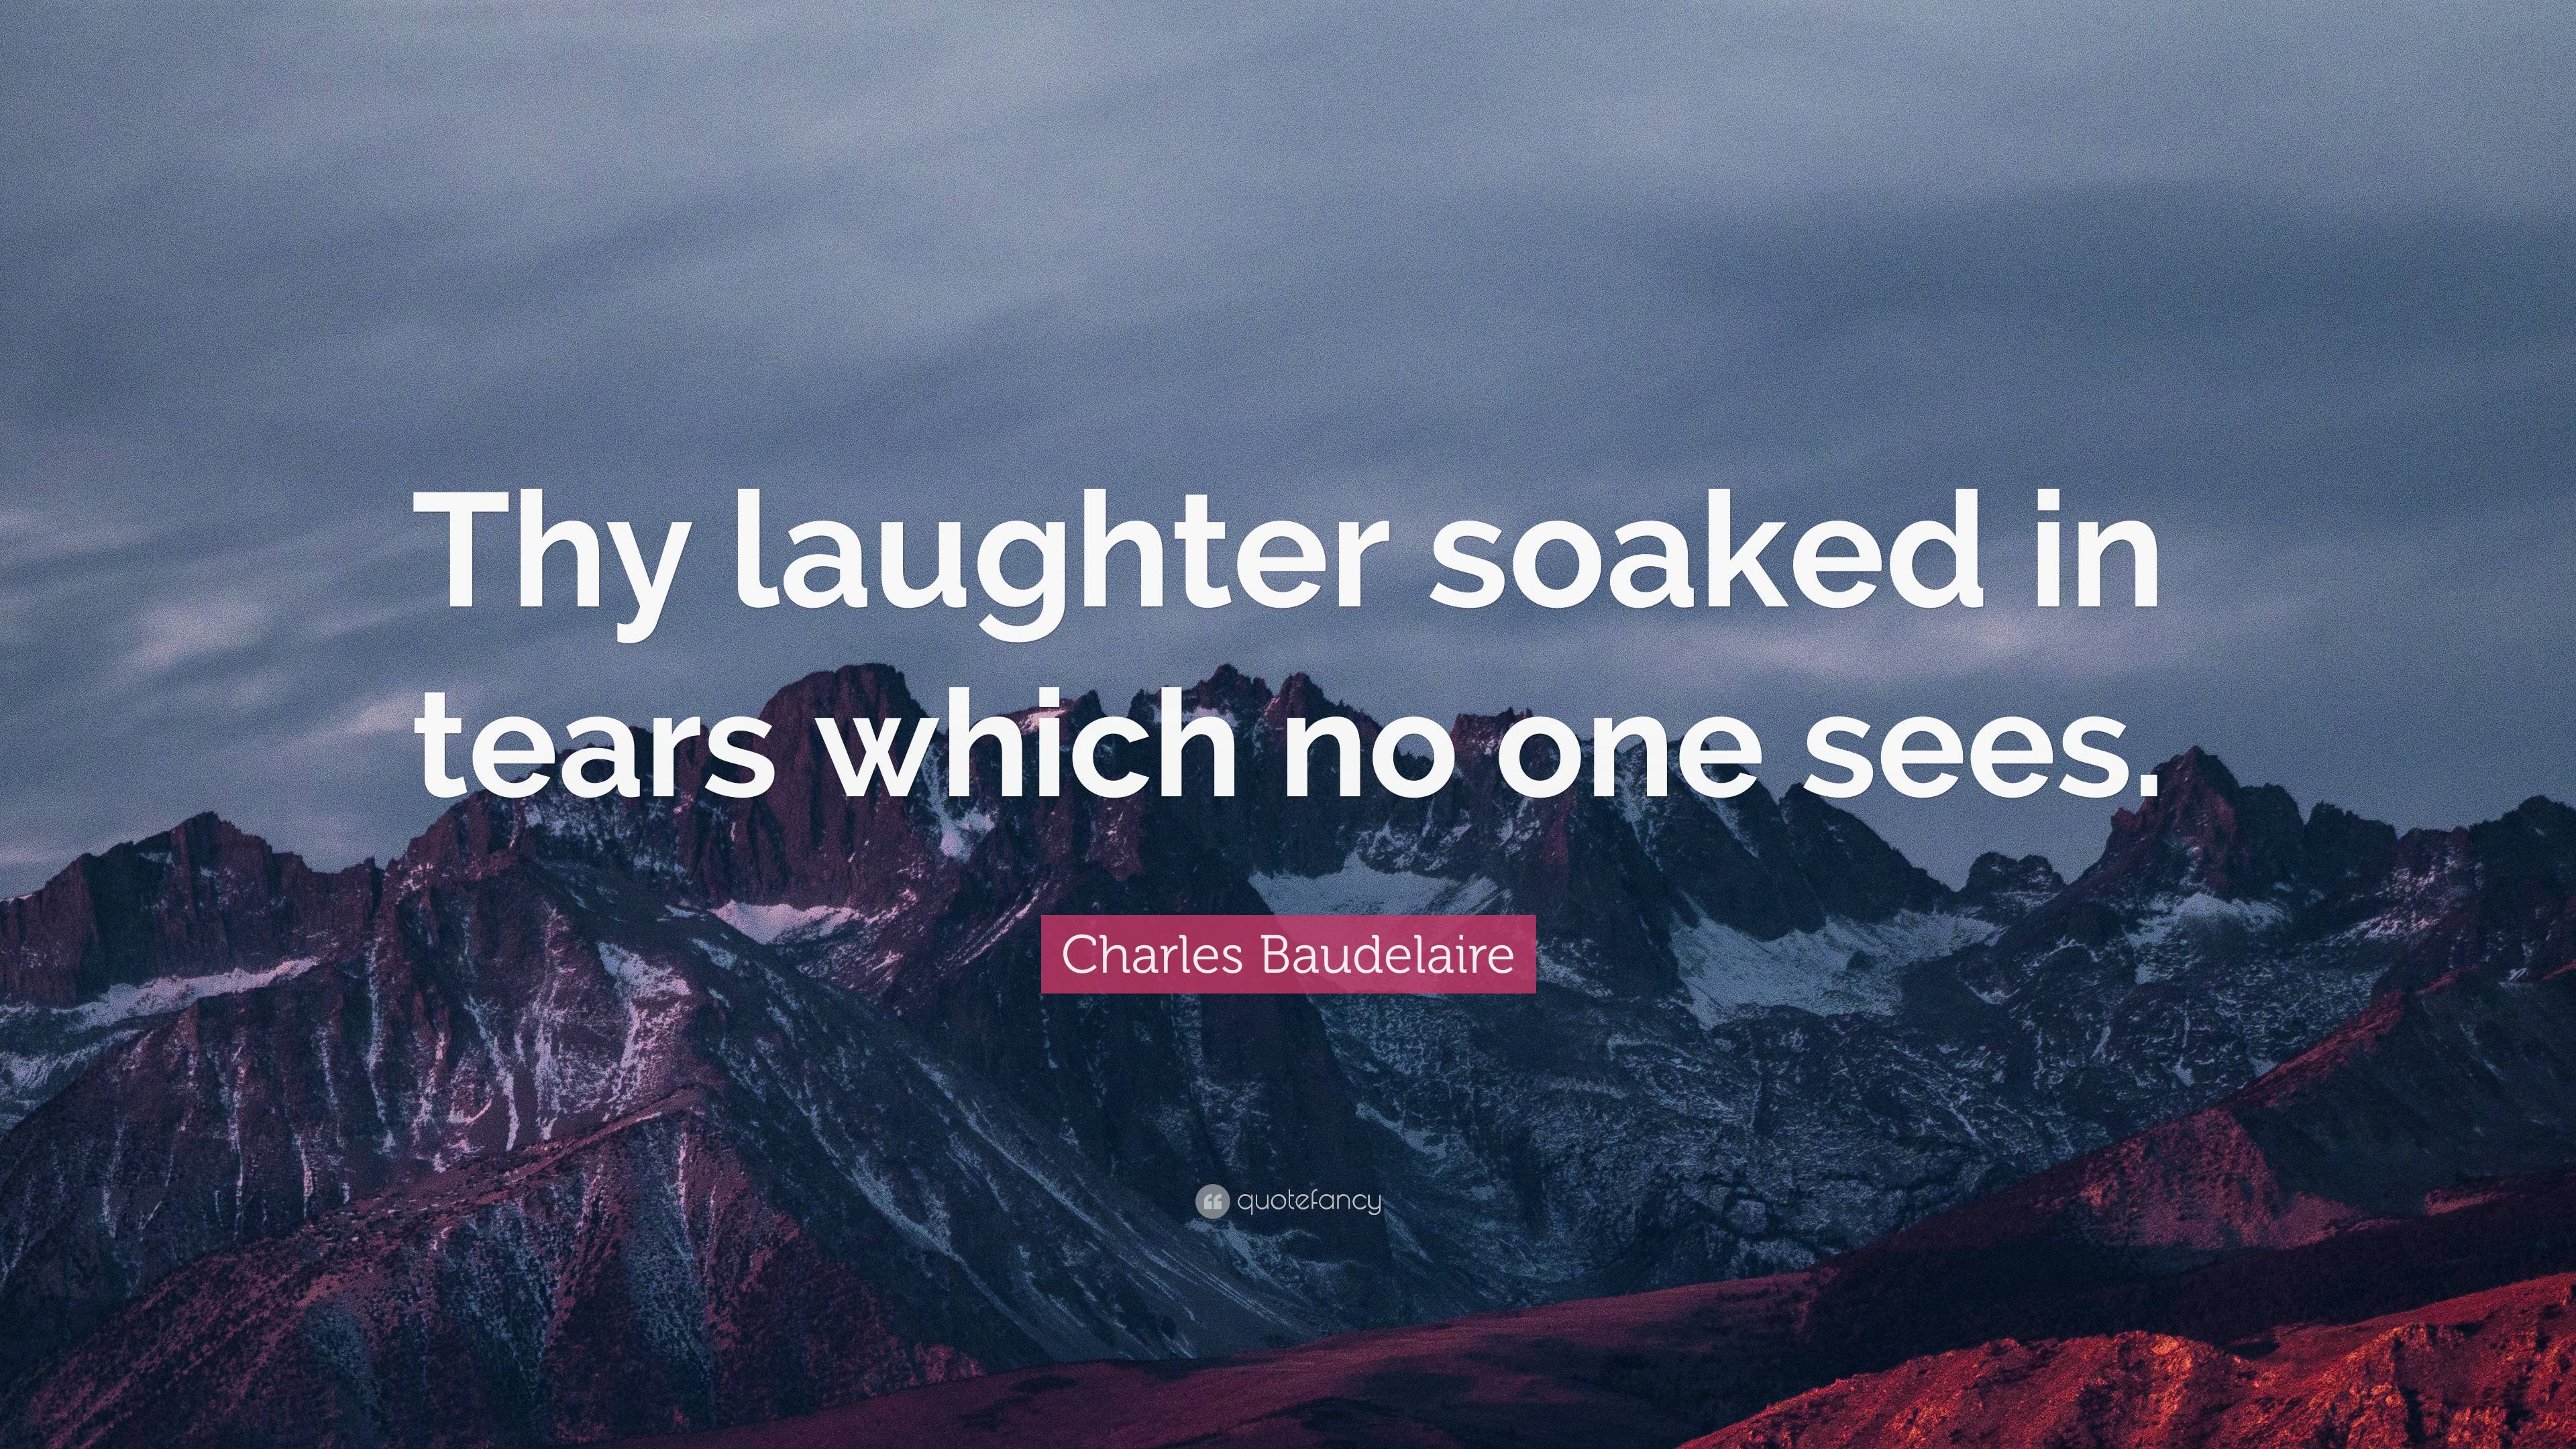 Charles Baudelaire Quote: “Thy laughter soaked in tears which no one sees.”